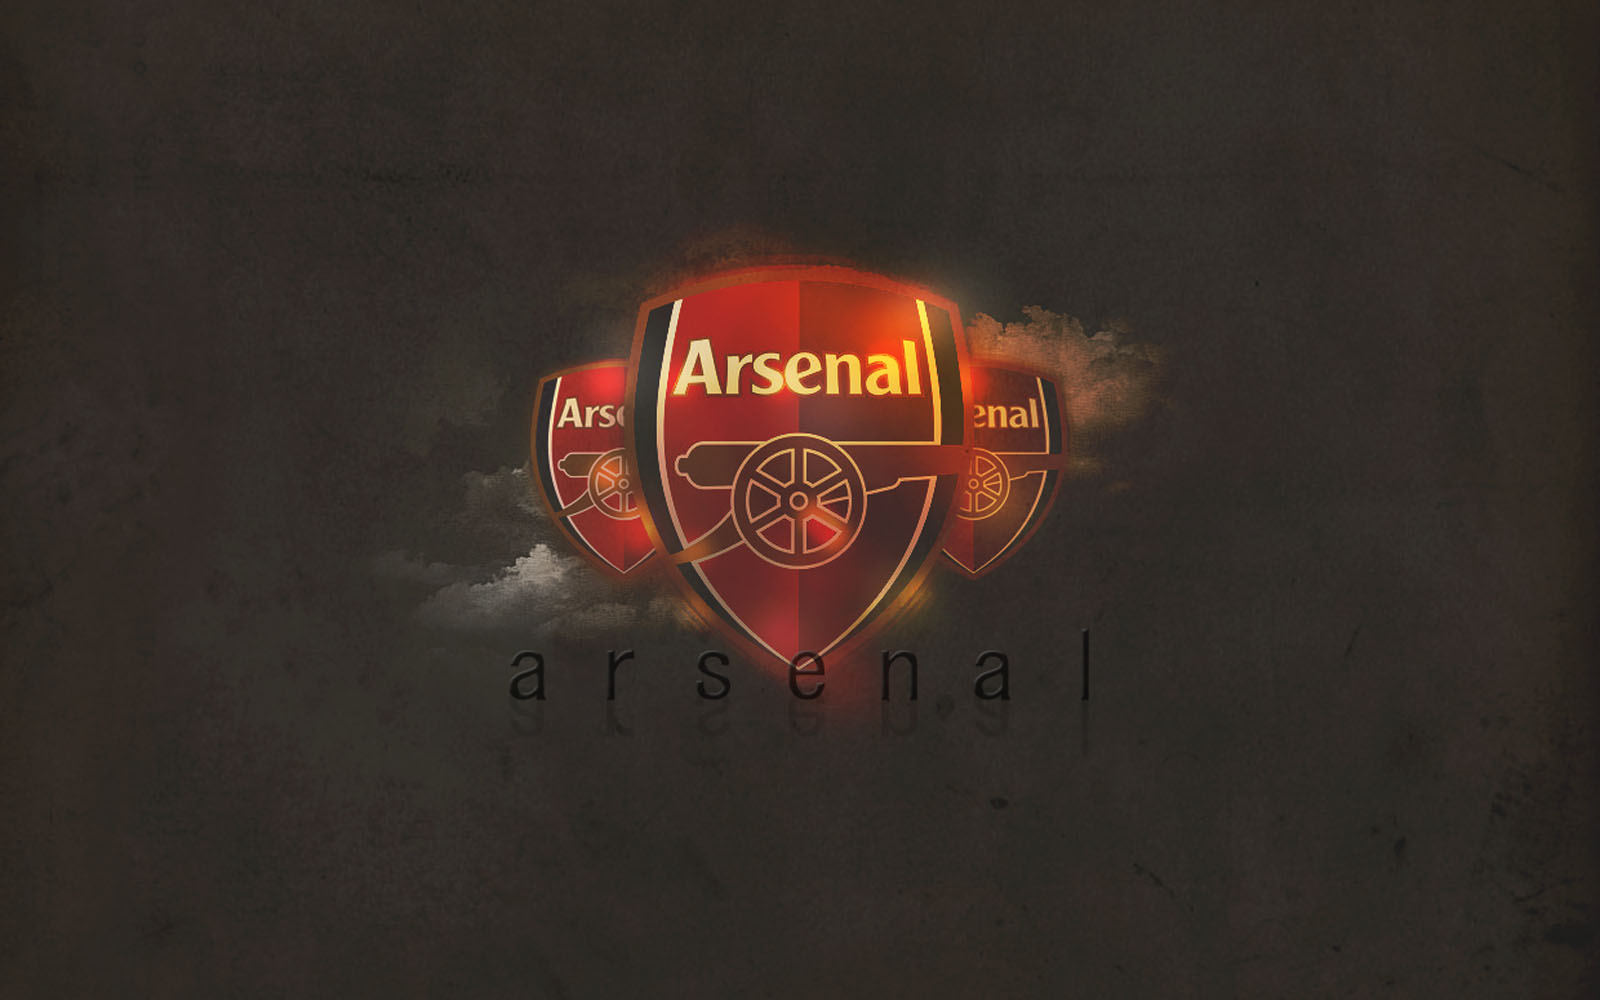 Tag Arsenal Wallpaper Background Photos Image And Pictures For